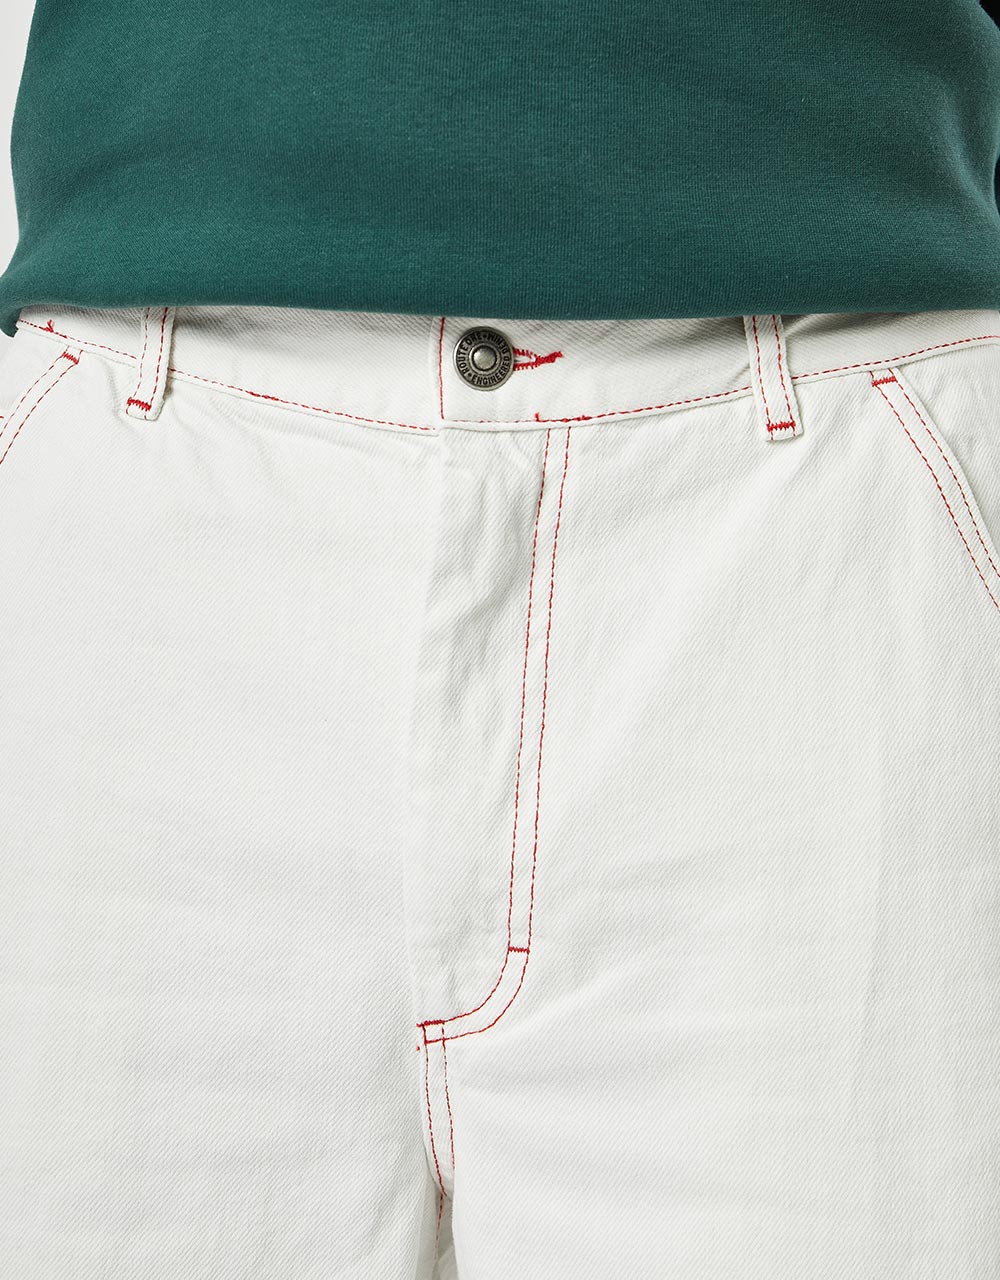 Route One Super Baggy Denim Shorts - Ivory Cream